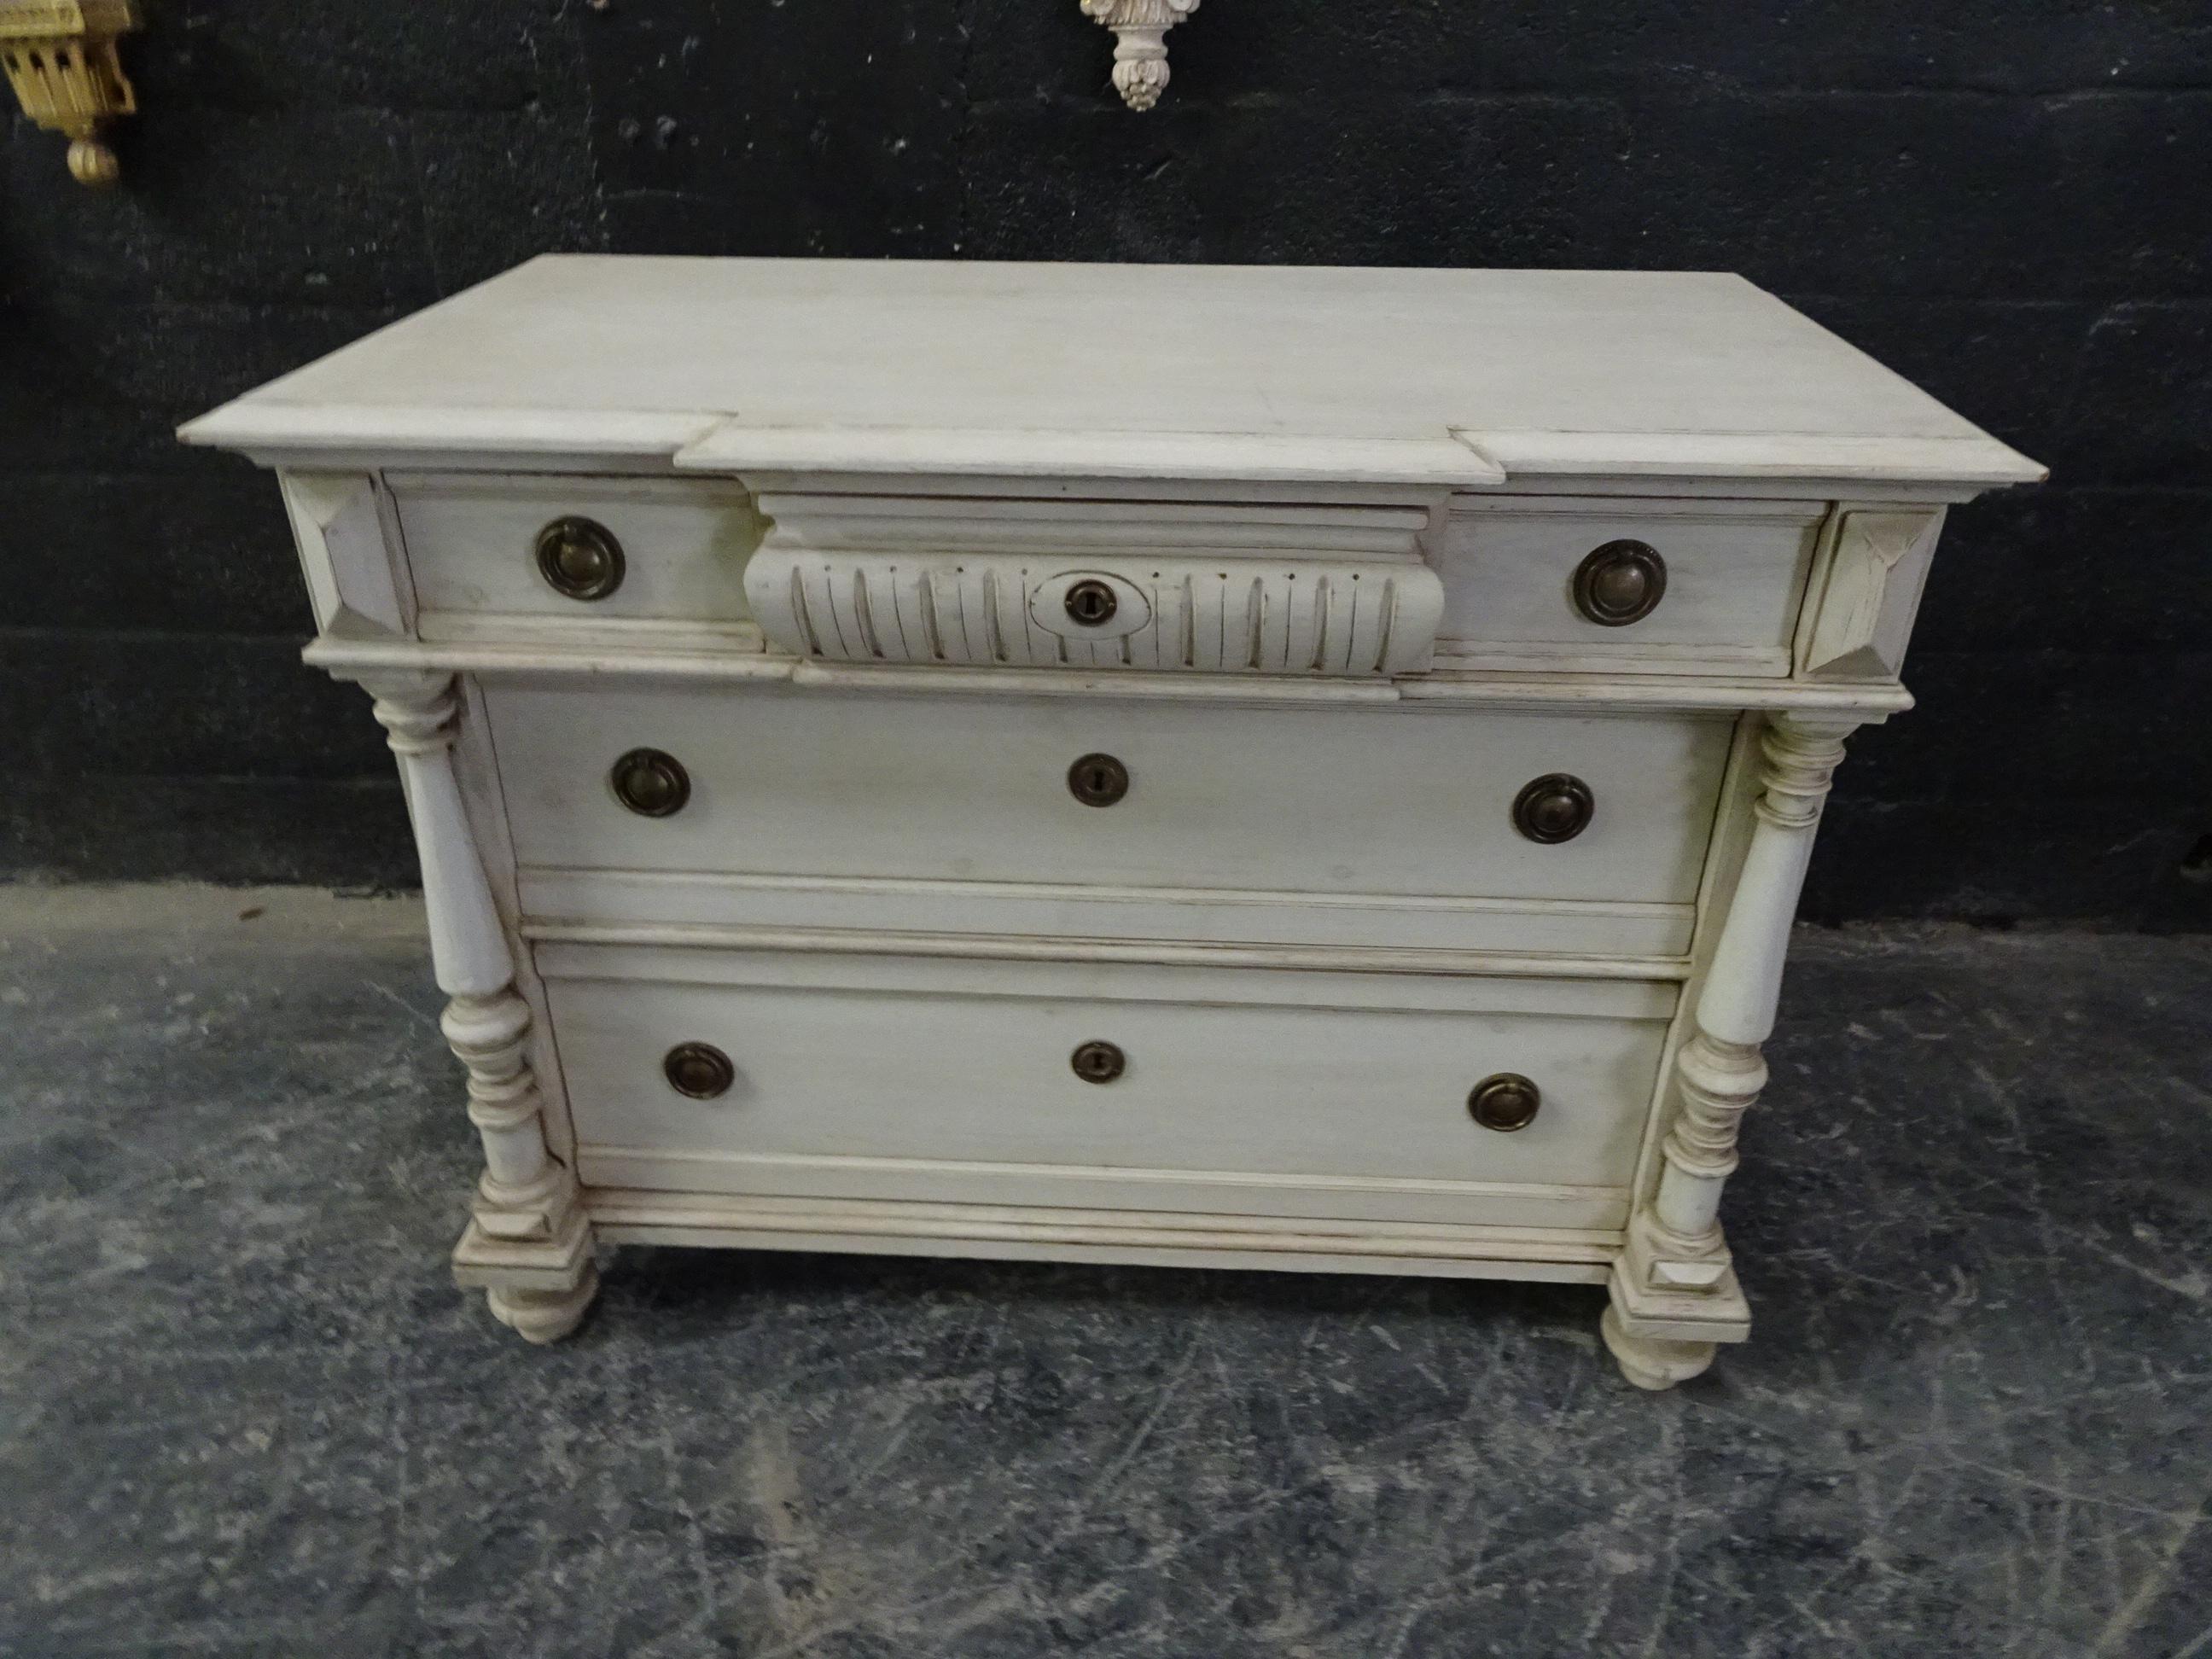 This is a Swedish Gustavian style chest, its been restored and repainted with milk paints 